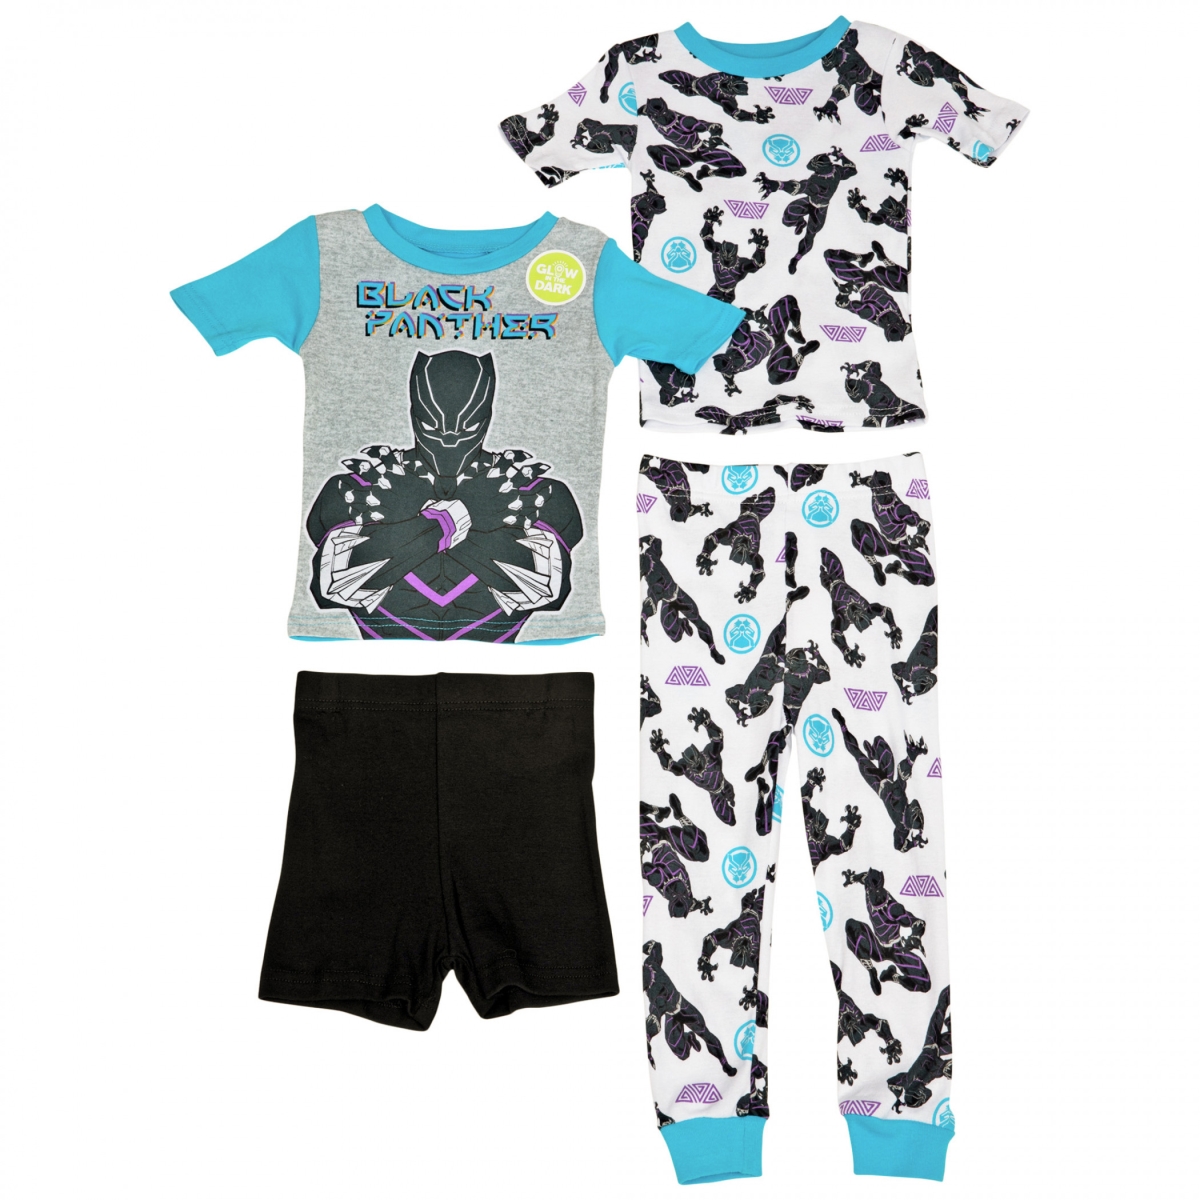 Picture of Black Panther 838760-size8 Black Panther Youth Glow in the Dark Shirt & Pants Set - Size 8 - 4 Piece